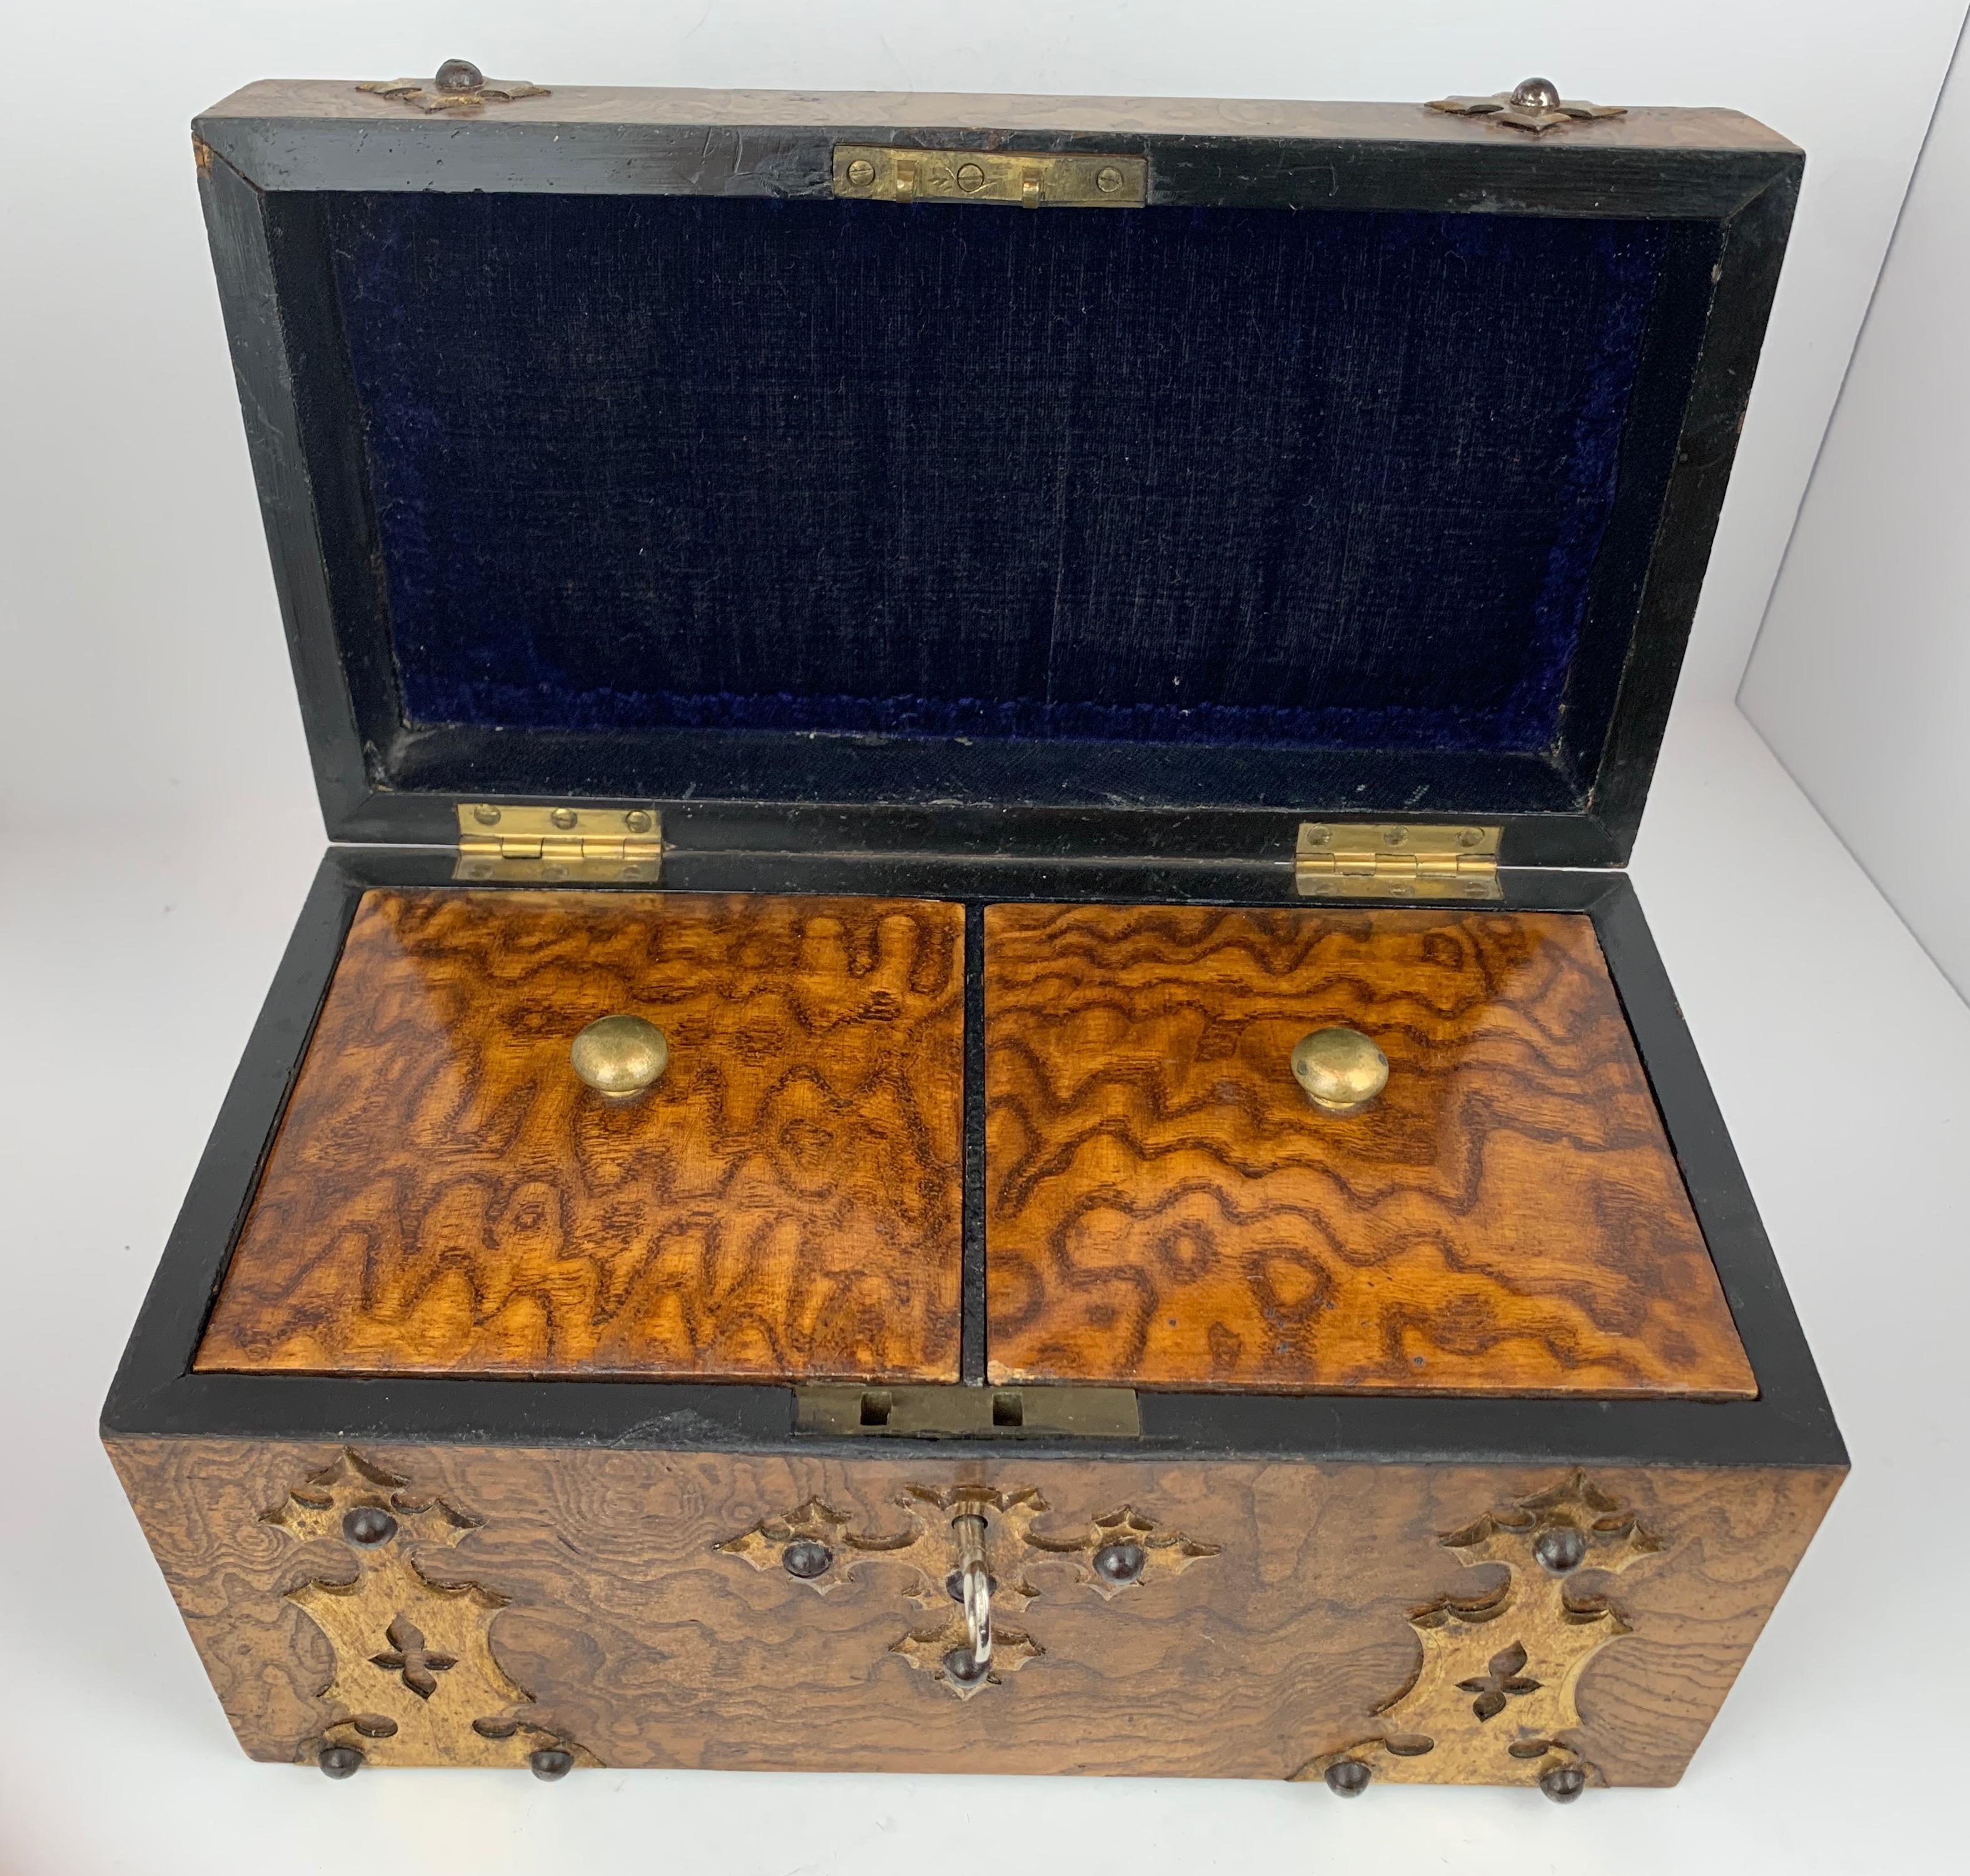 Antique English tea caddy made from Carpathian Elm with two compartments for two different teas. The exterior is embellished with brass trim and studs. The compartments are lined with marbleized paper.